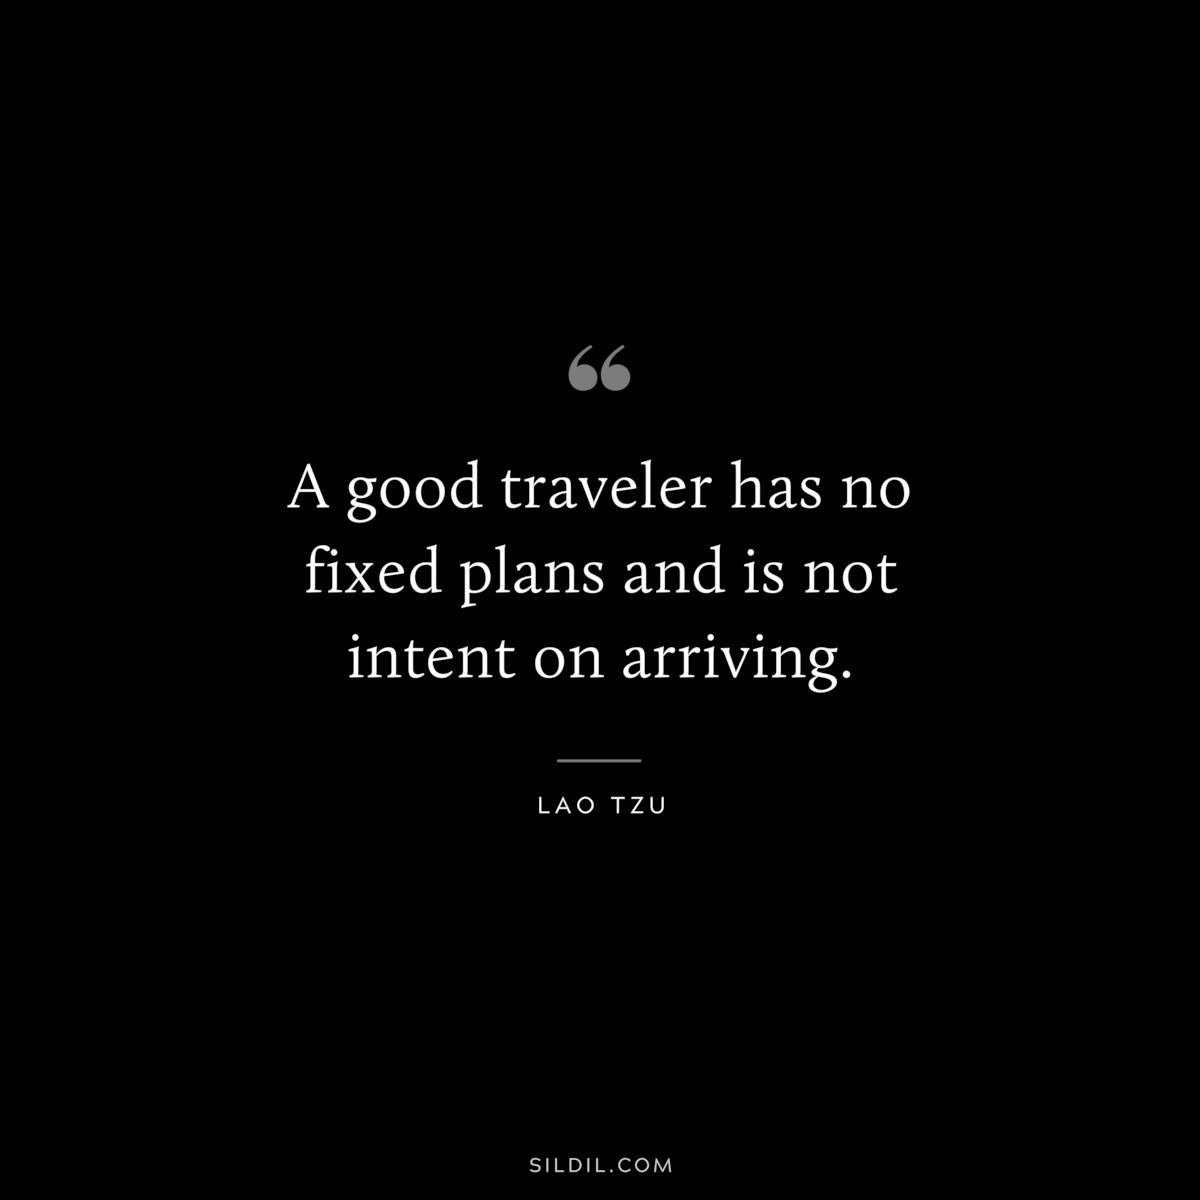 A good traveler has no fixed plans and is not intent on arriving. ― Lao Tzu